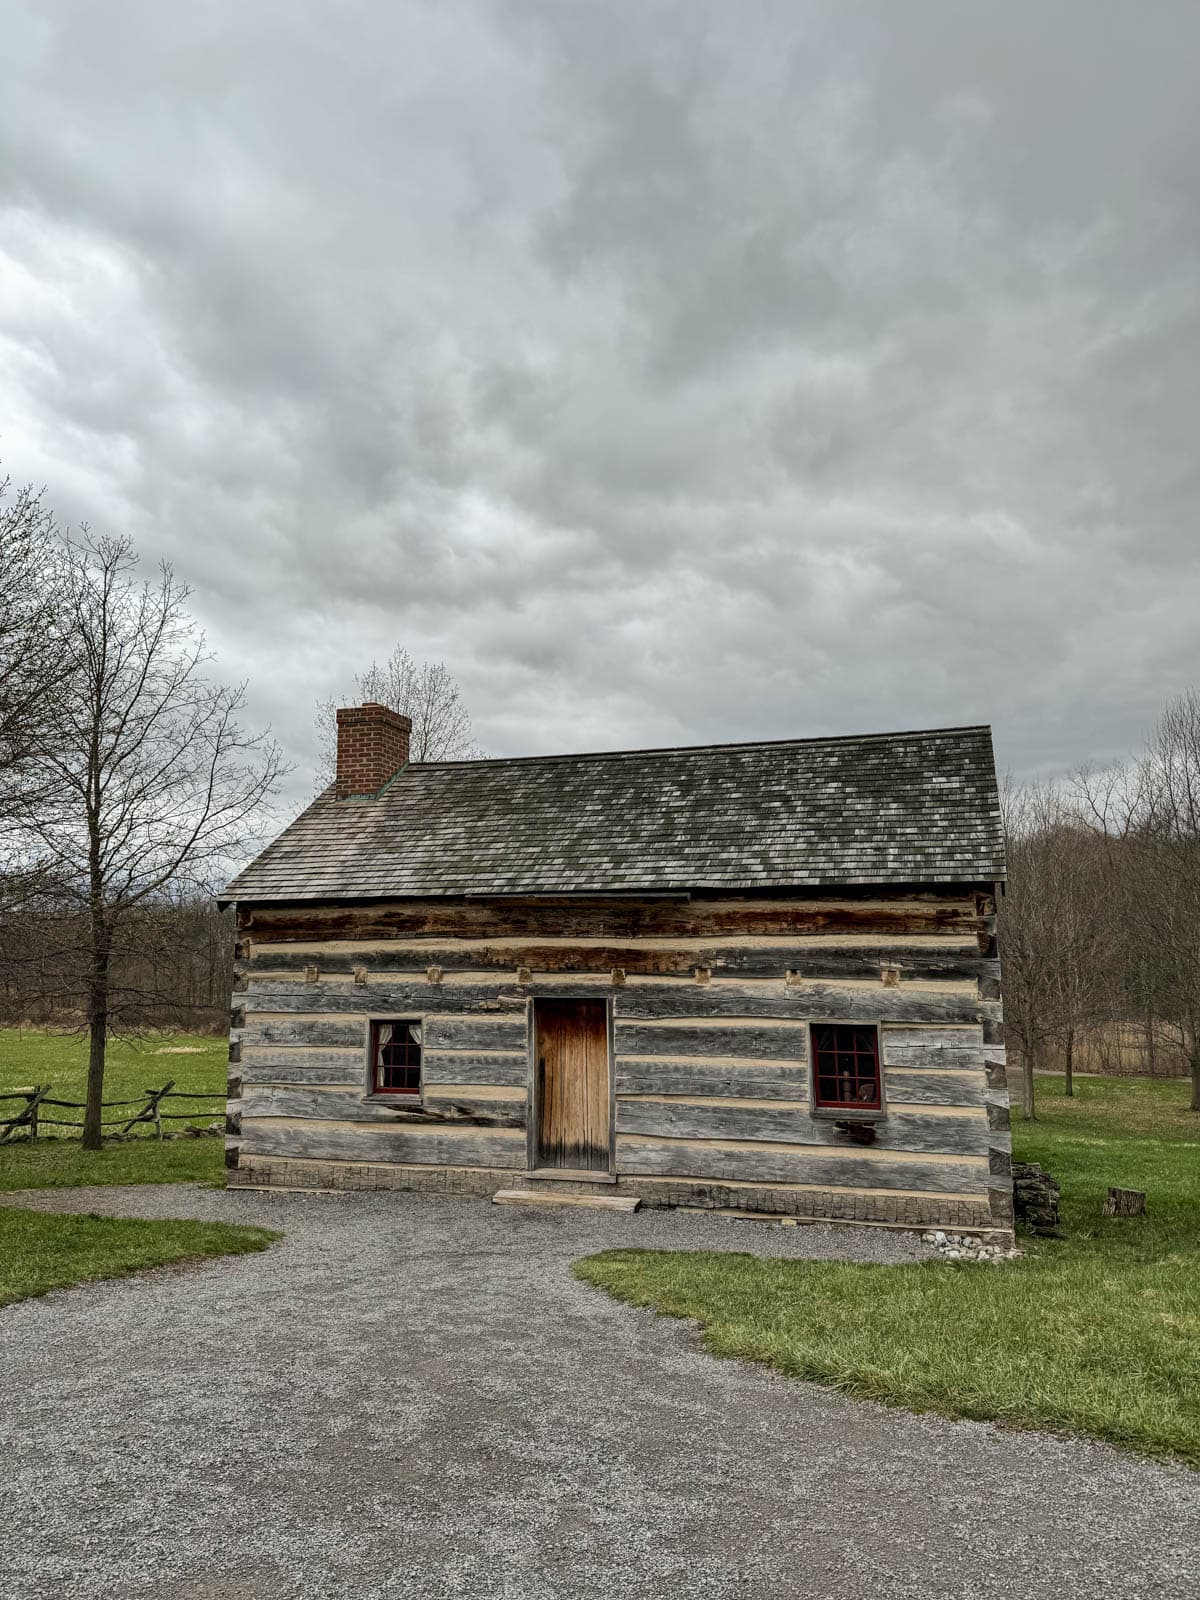 An image of the Joseph Smith log home in Palmyra, New York.